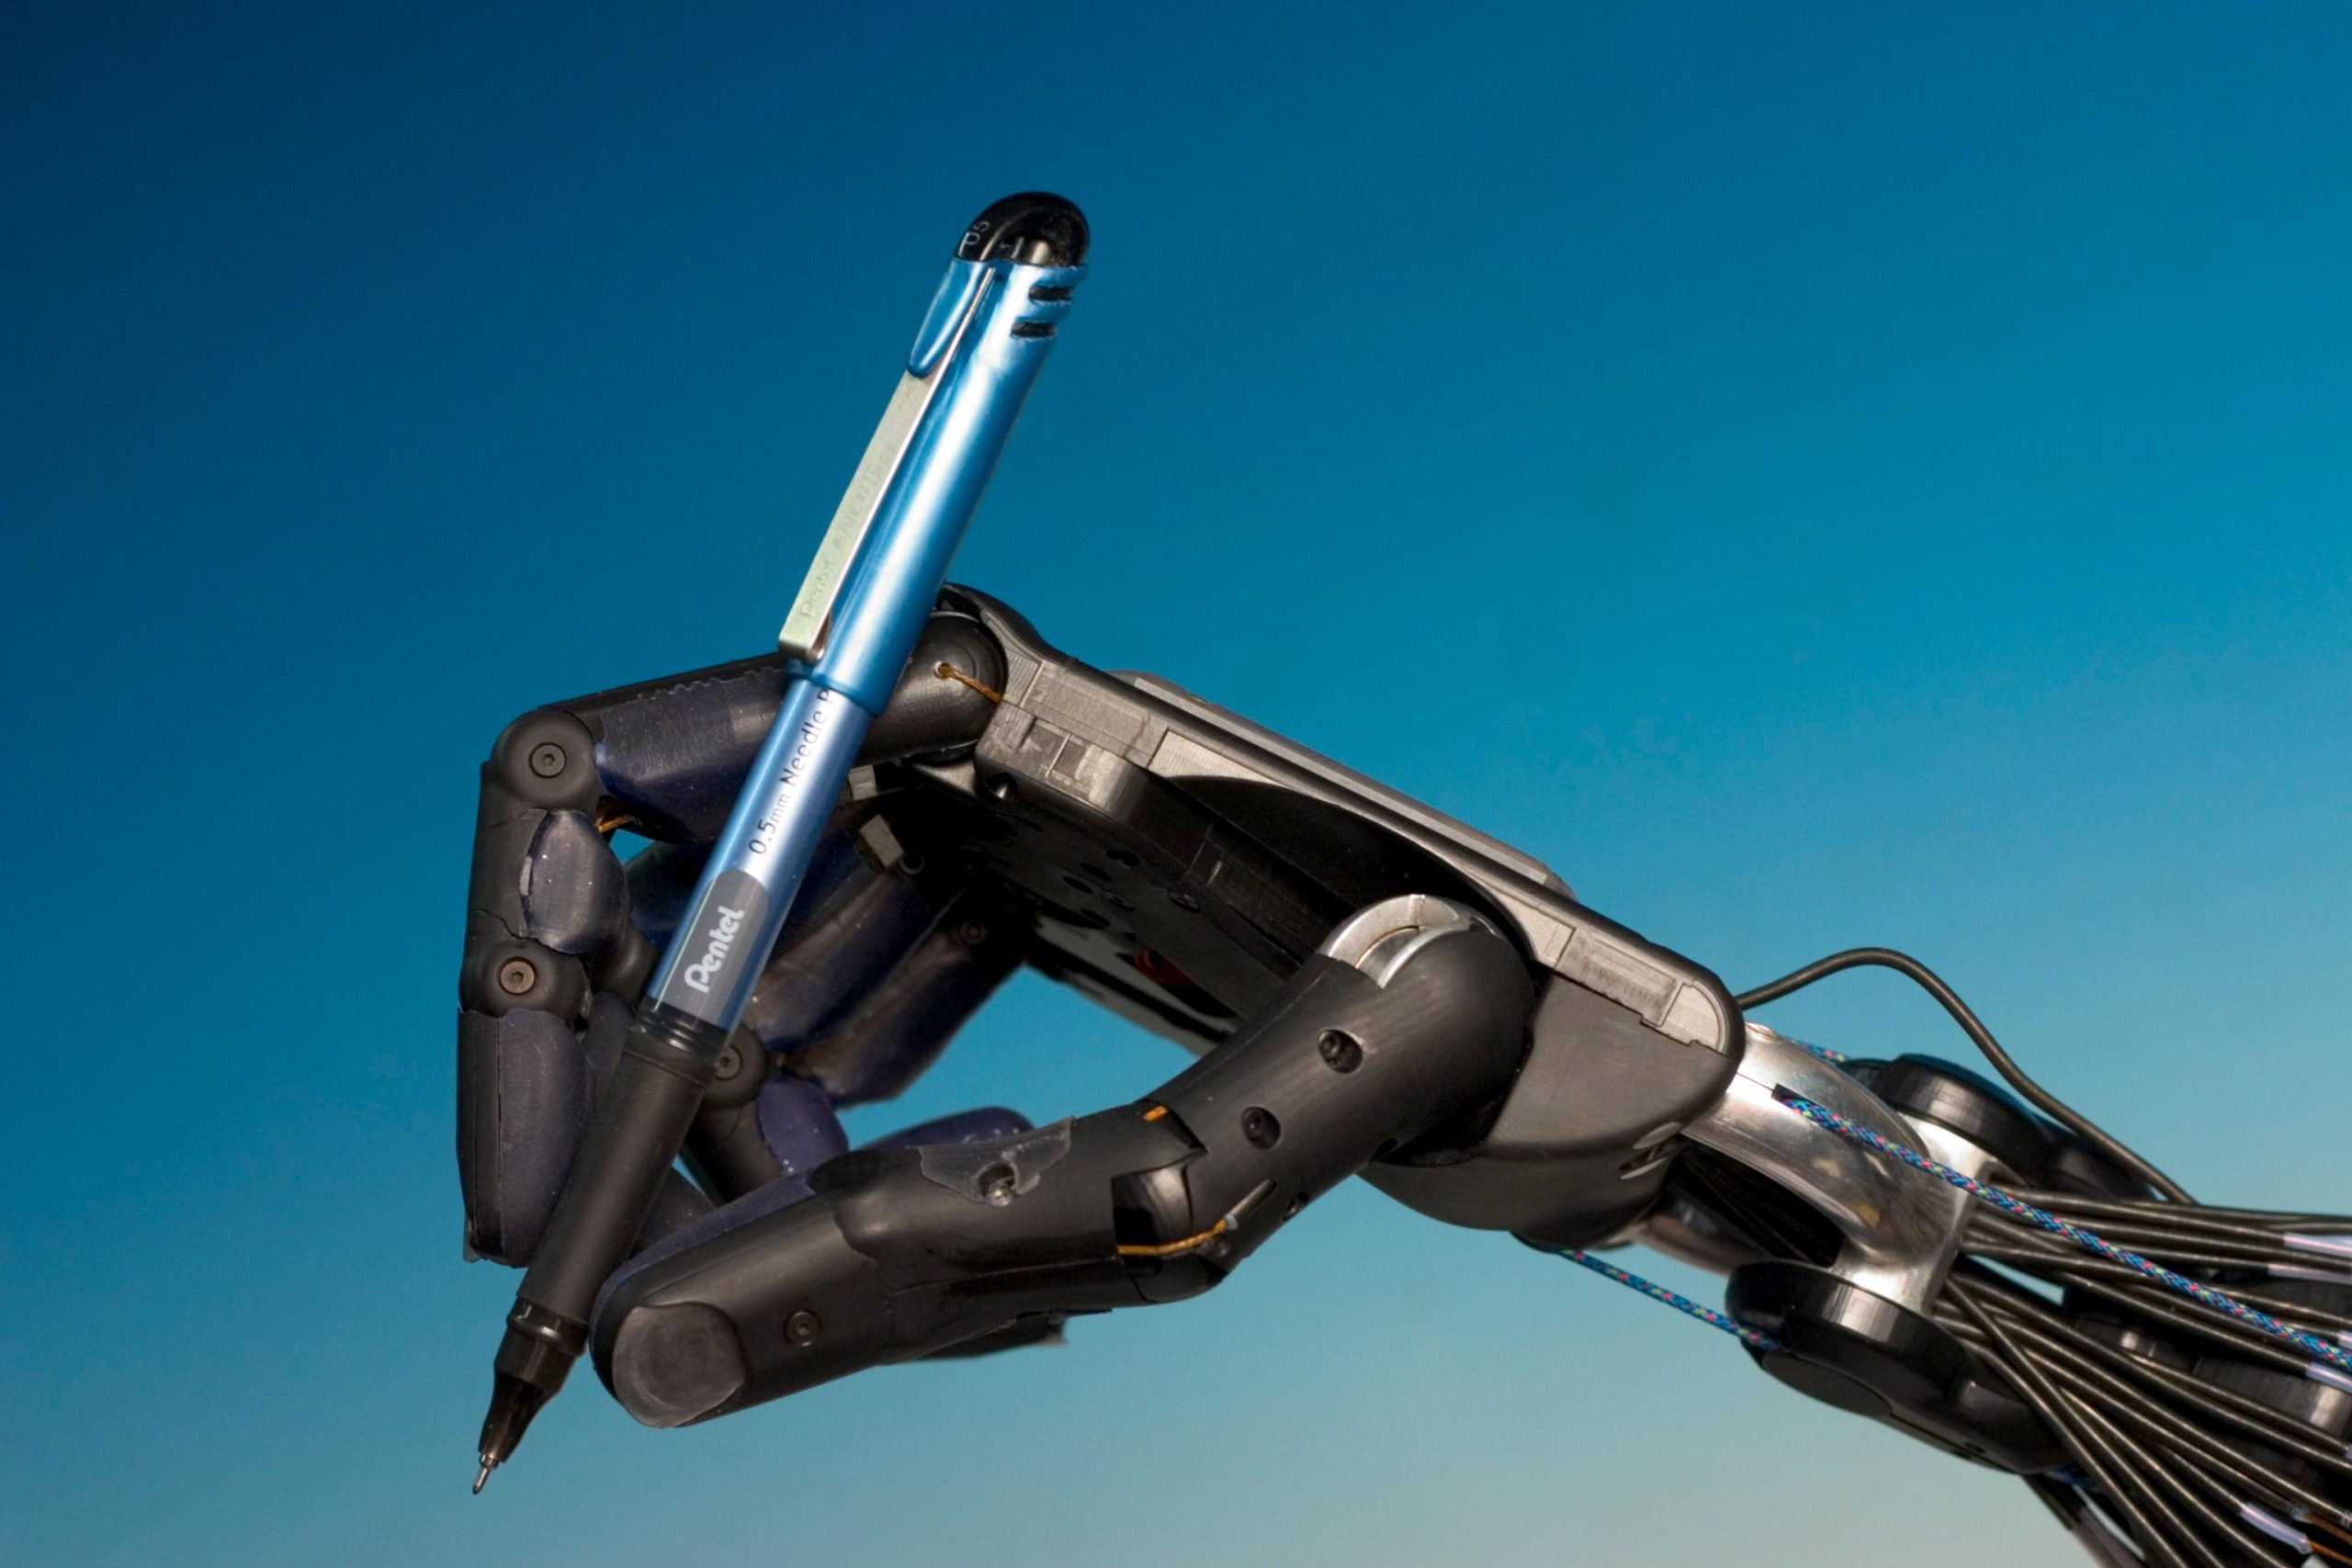 Dexterous Hand An Ultrasensitive New Robotic Hand With A Sense Of Touch